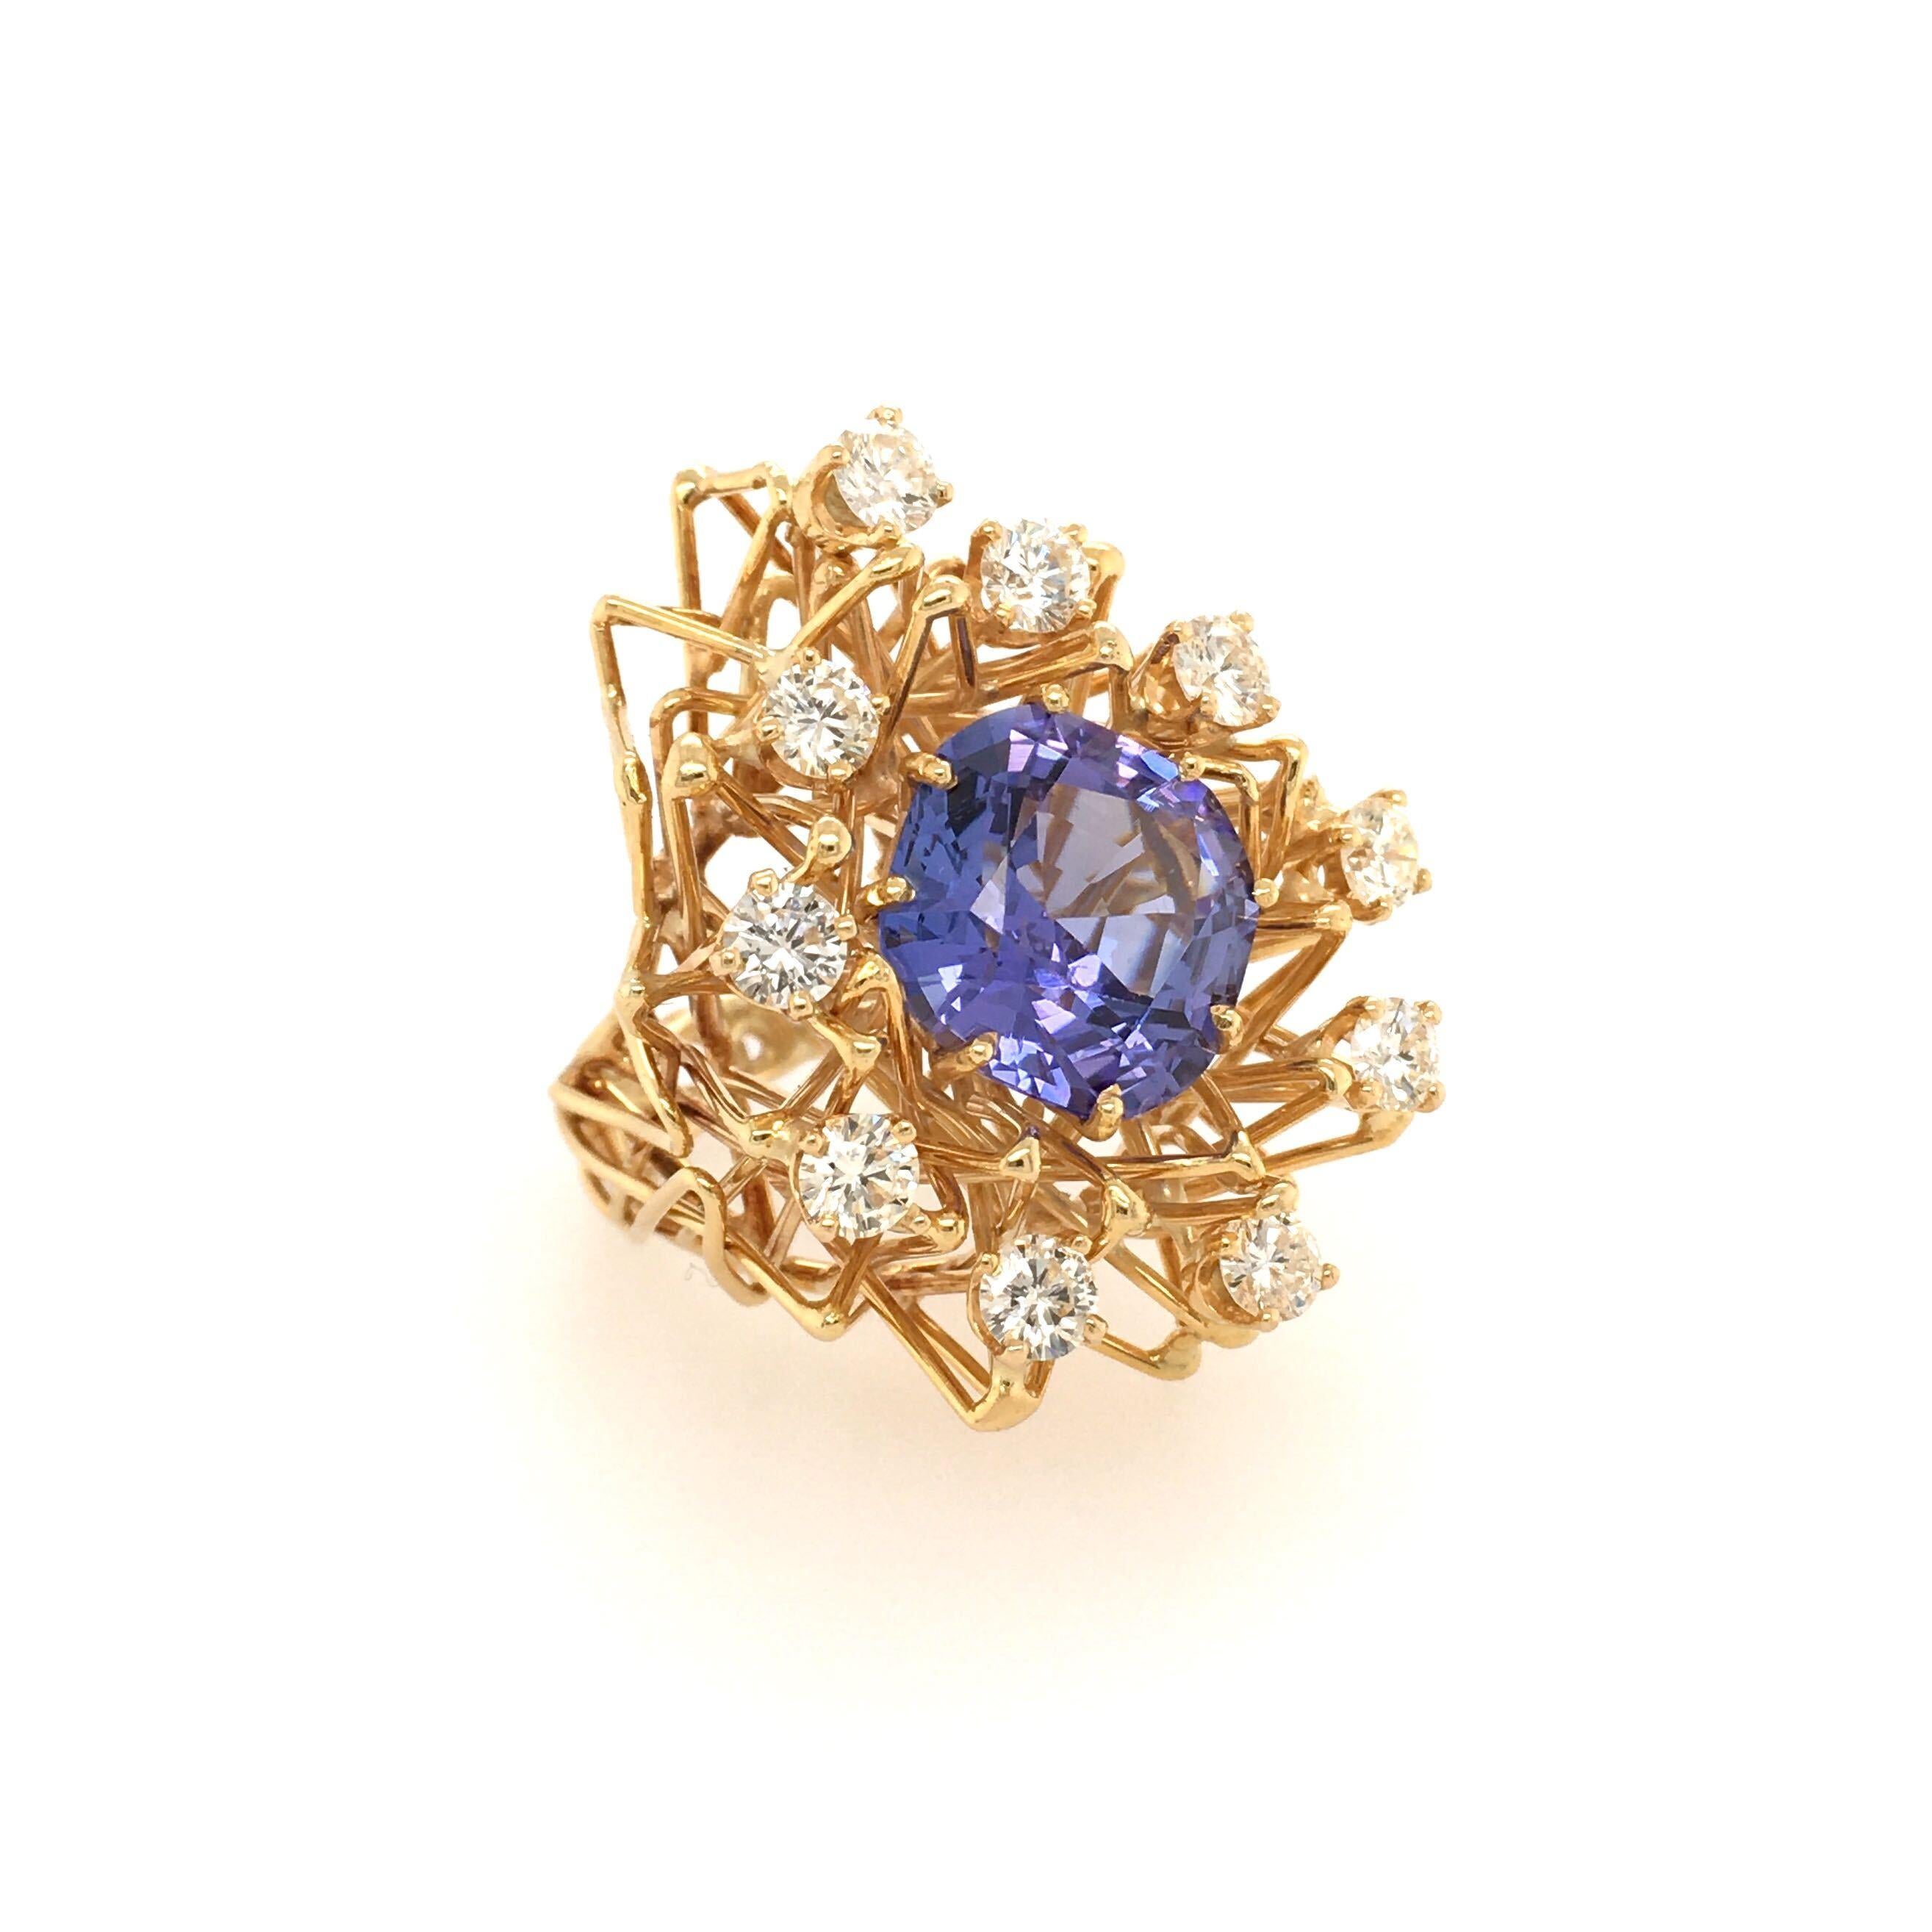 An 18 karat yellow gold, tanzanite and diamond ring, attributed to Boris Le Beau. Of openwork wire design, centering a cushion cut tanzanite, measuring approximately 13.0 x 13.0mm, enhanced by circular cut diamonds. Ten (10) circular cut diamonds